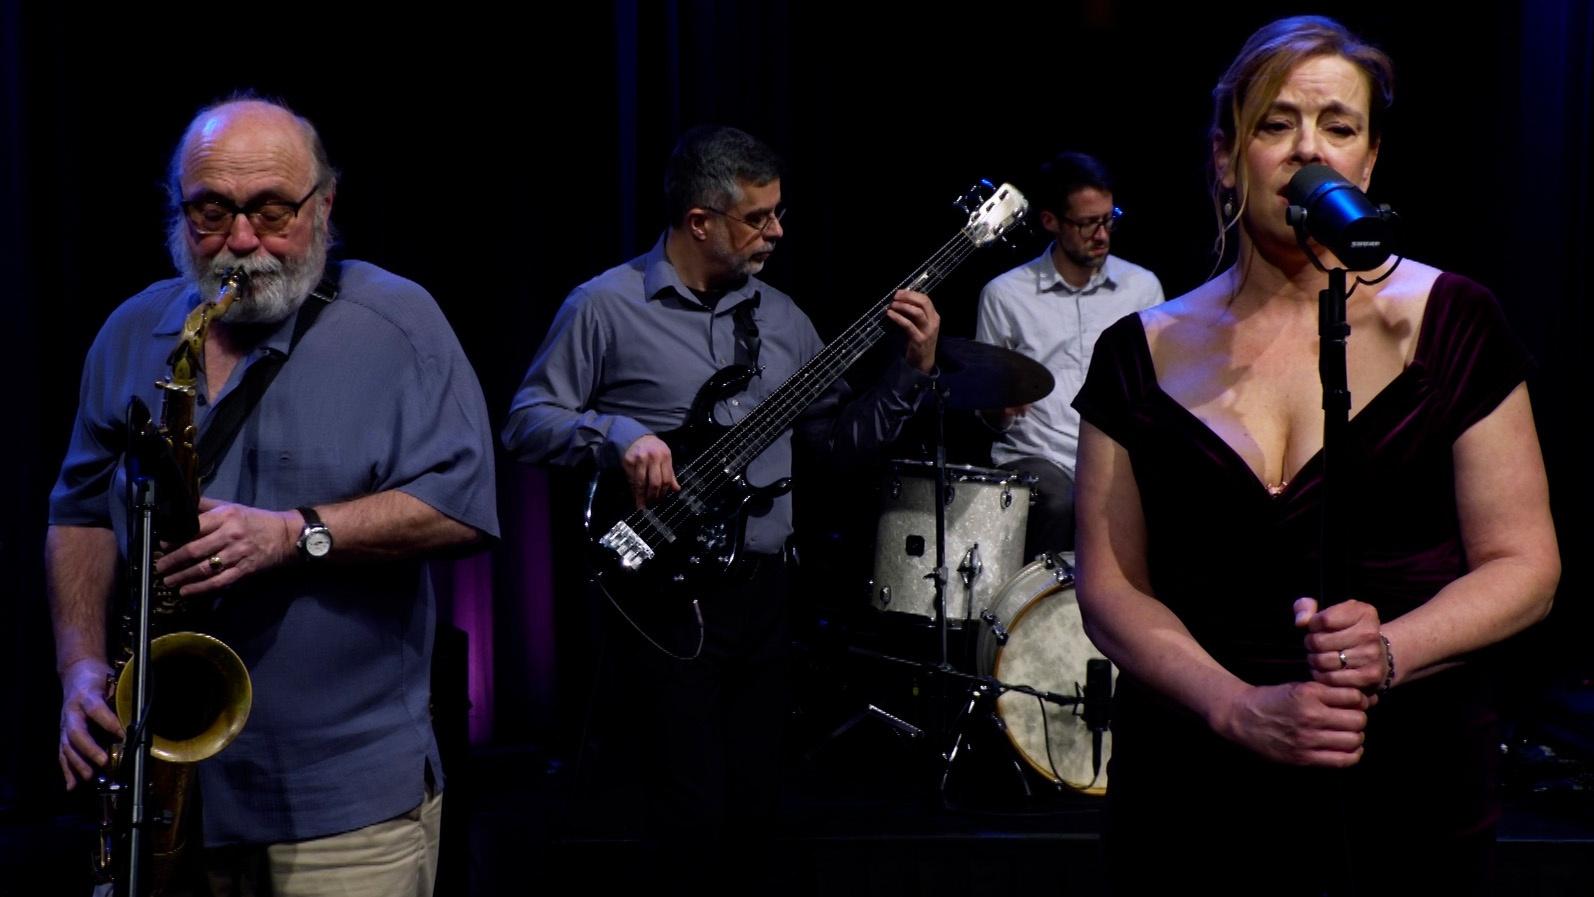 Four middle age men playing musical instruments along with woman singing into a microphone.